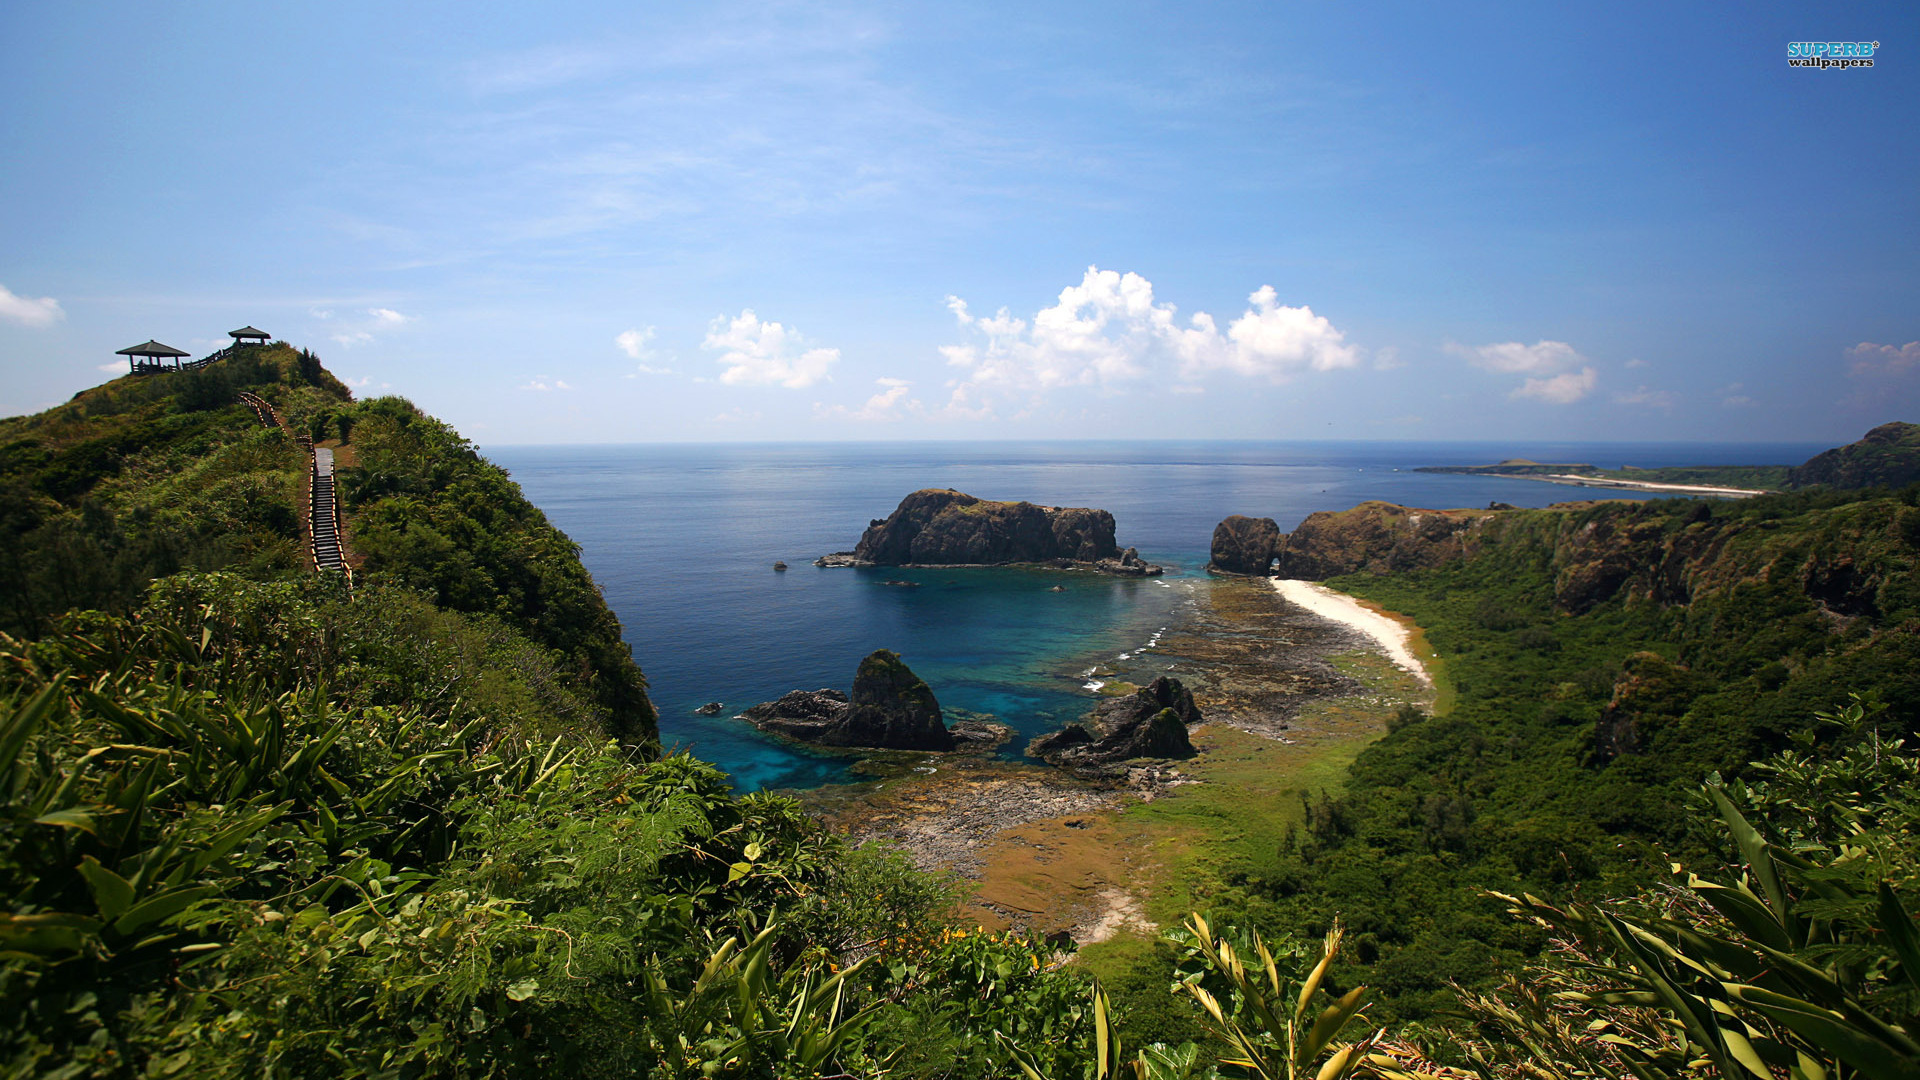 Green Island, Taiwan: A stunning nature view of an island surrounded by crystal clear waters.